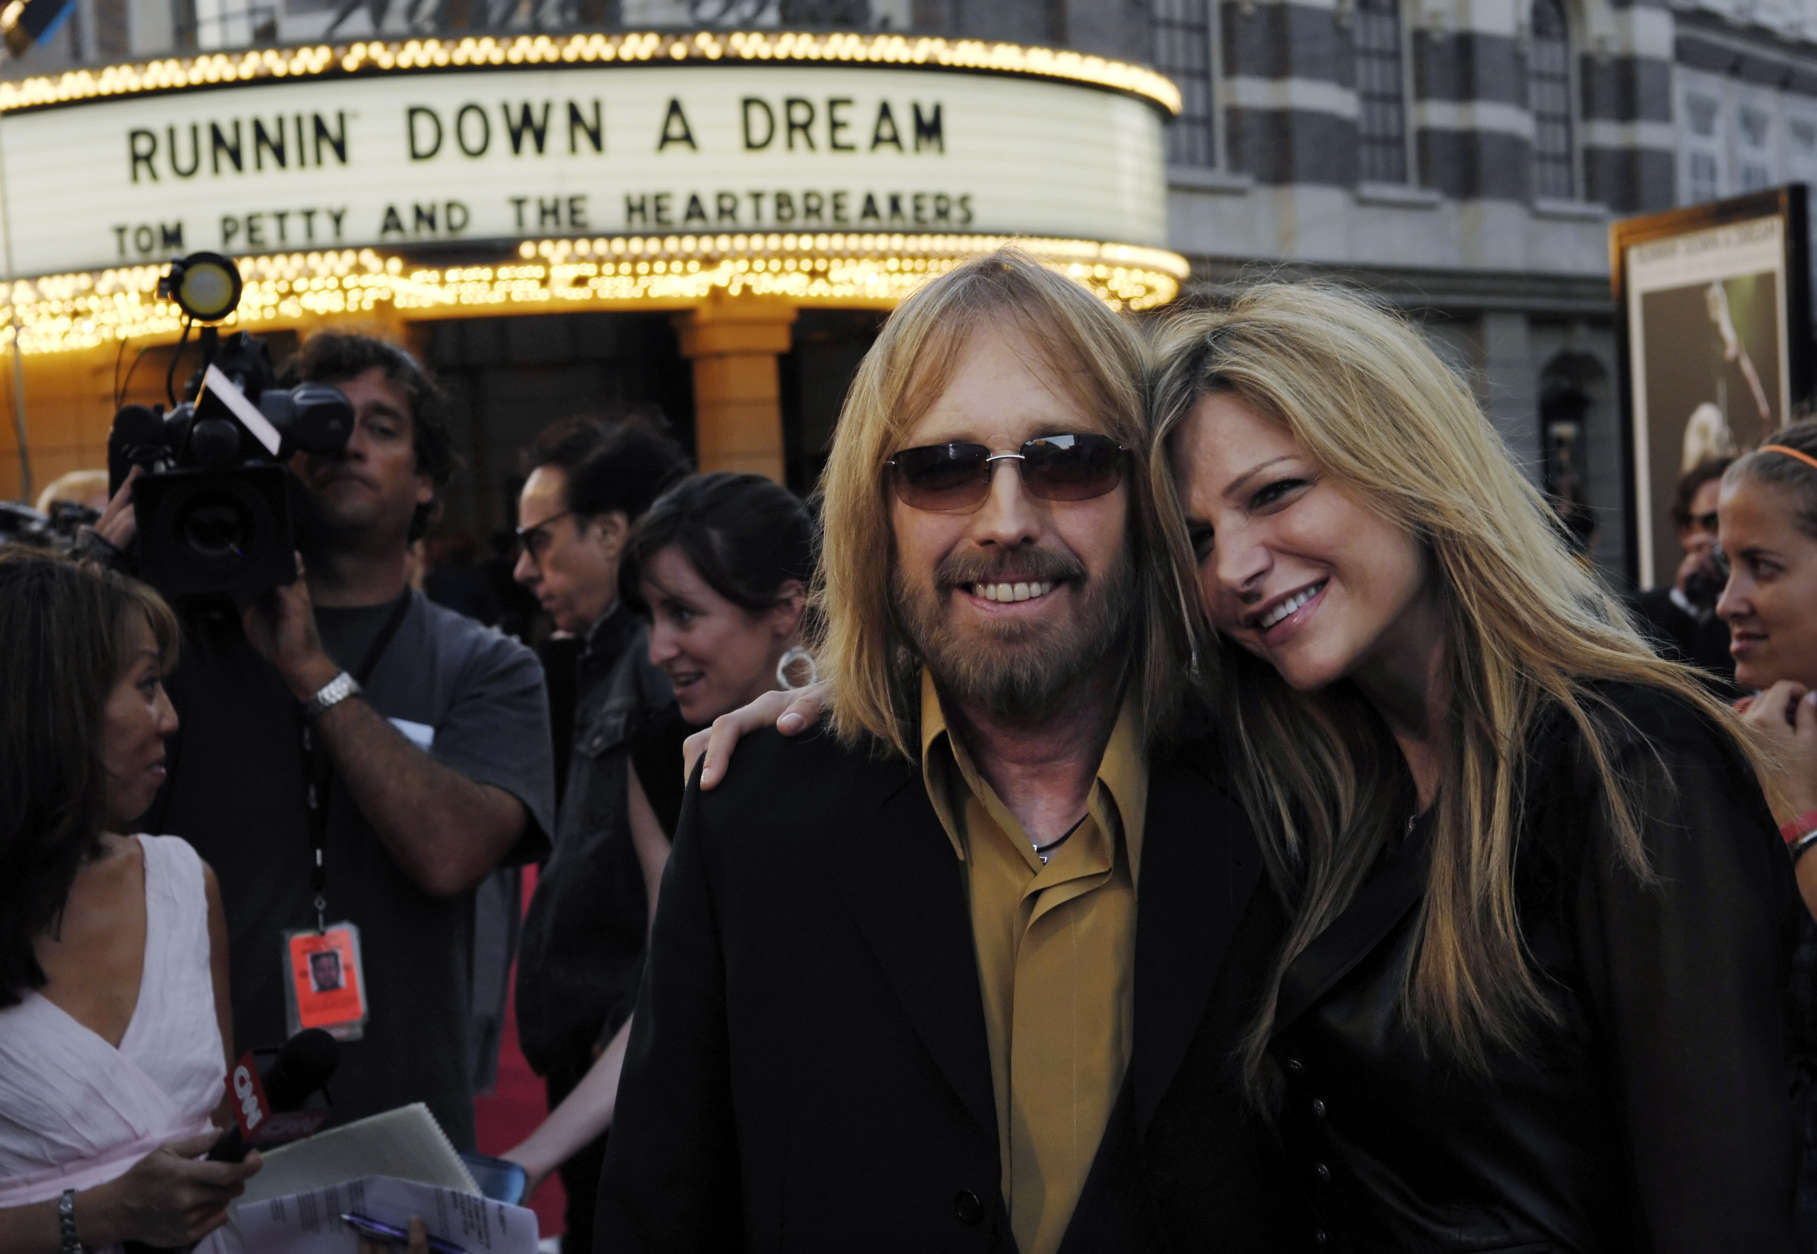 Rock singer Tom Petty and his wife Dana poses at the world premiere of the documentary film "Runnin' Down a Dream: Tom Petty and the Heartbreakers," at Warner Bros. Studios in Burbank, Calif., Tuesday, Oct. 2, 2007. (AP Photo/Chris Pizzello)